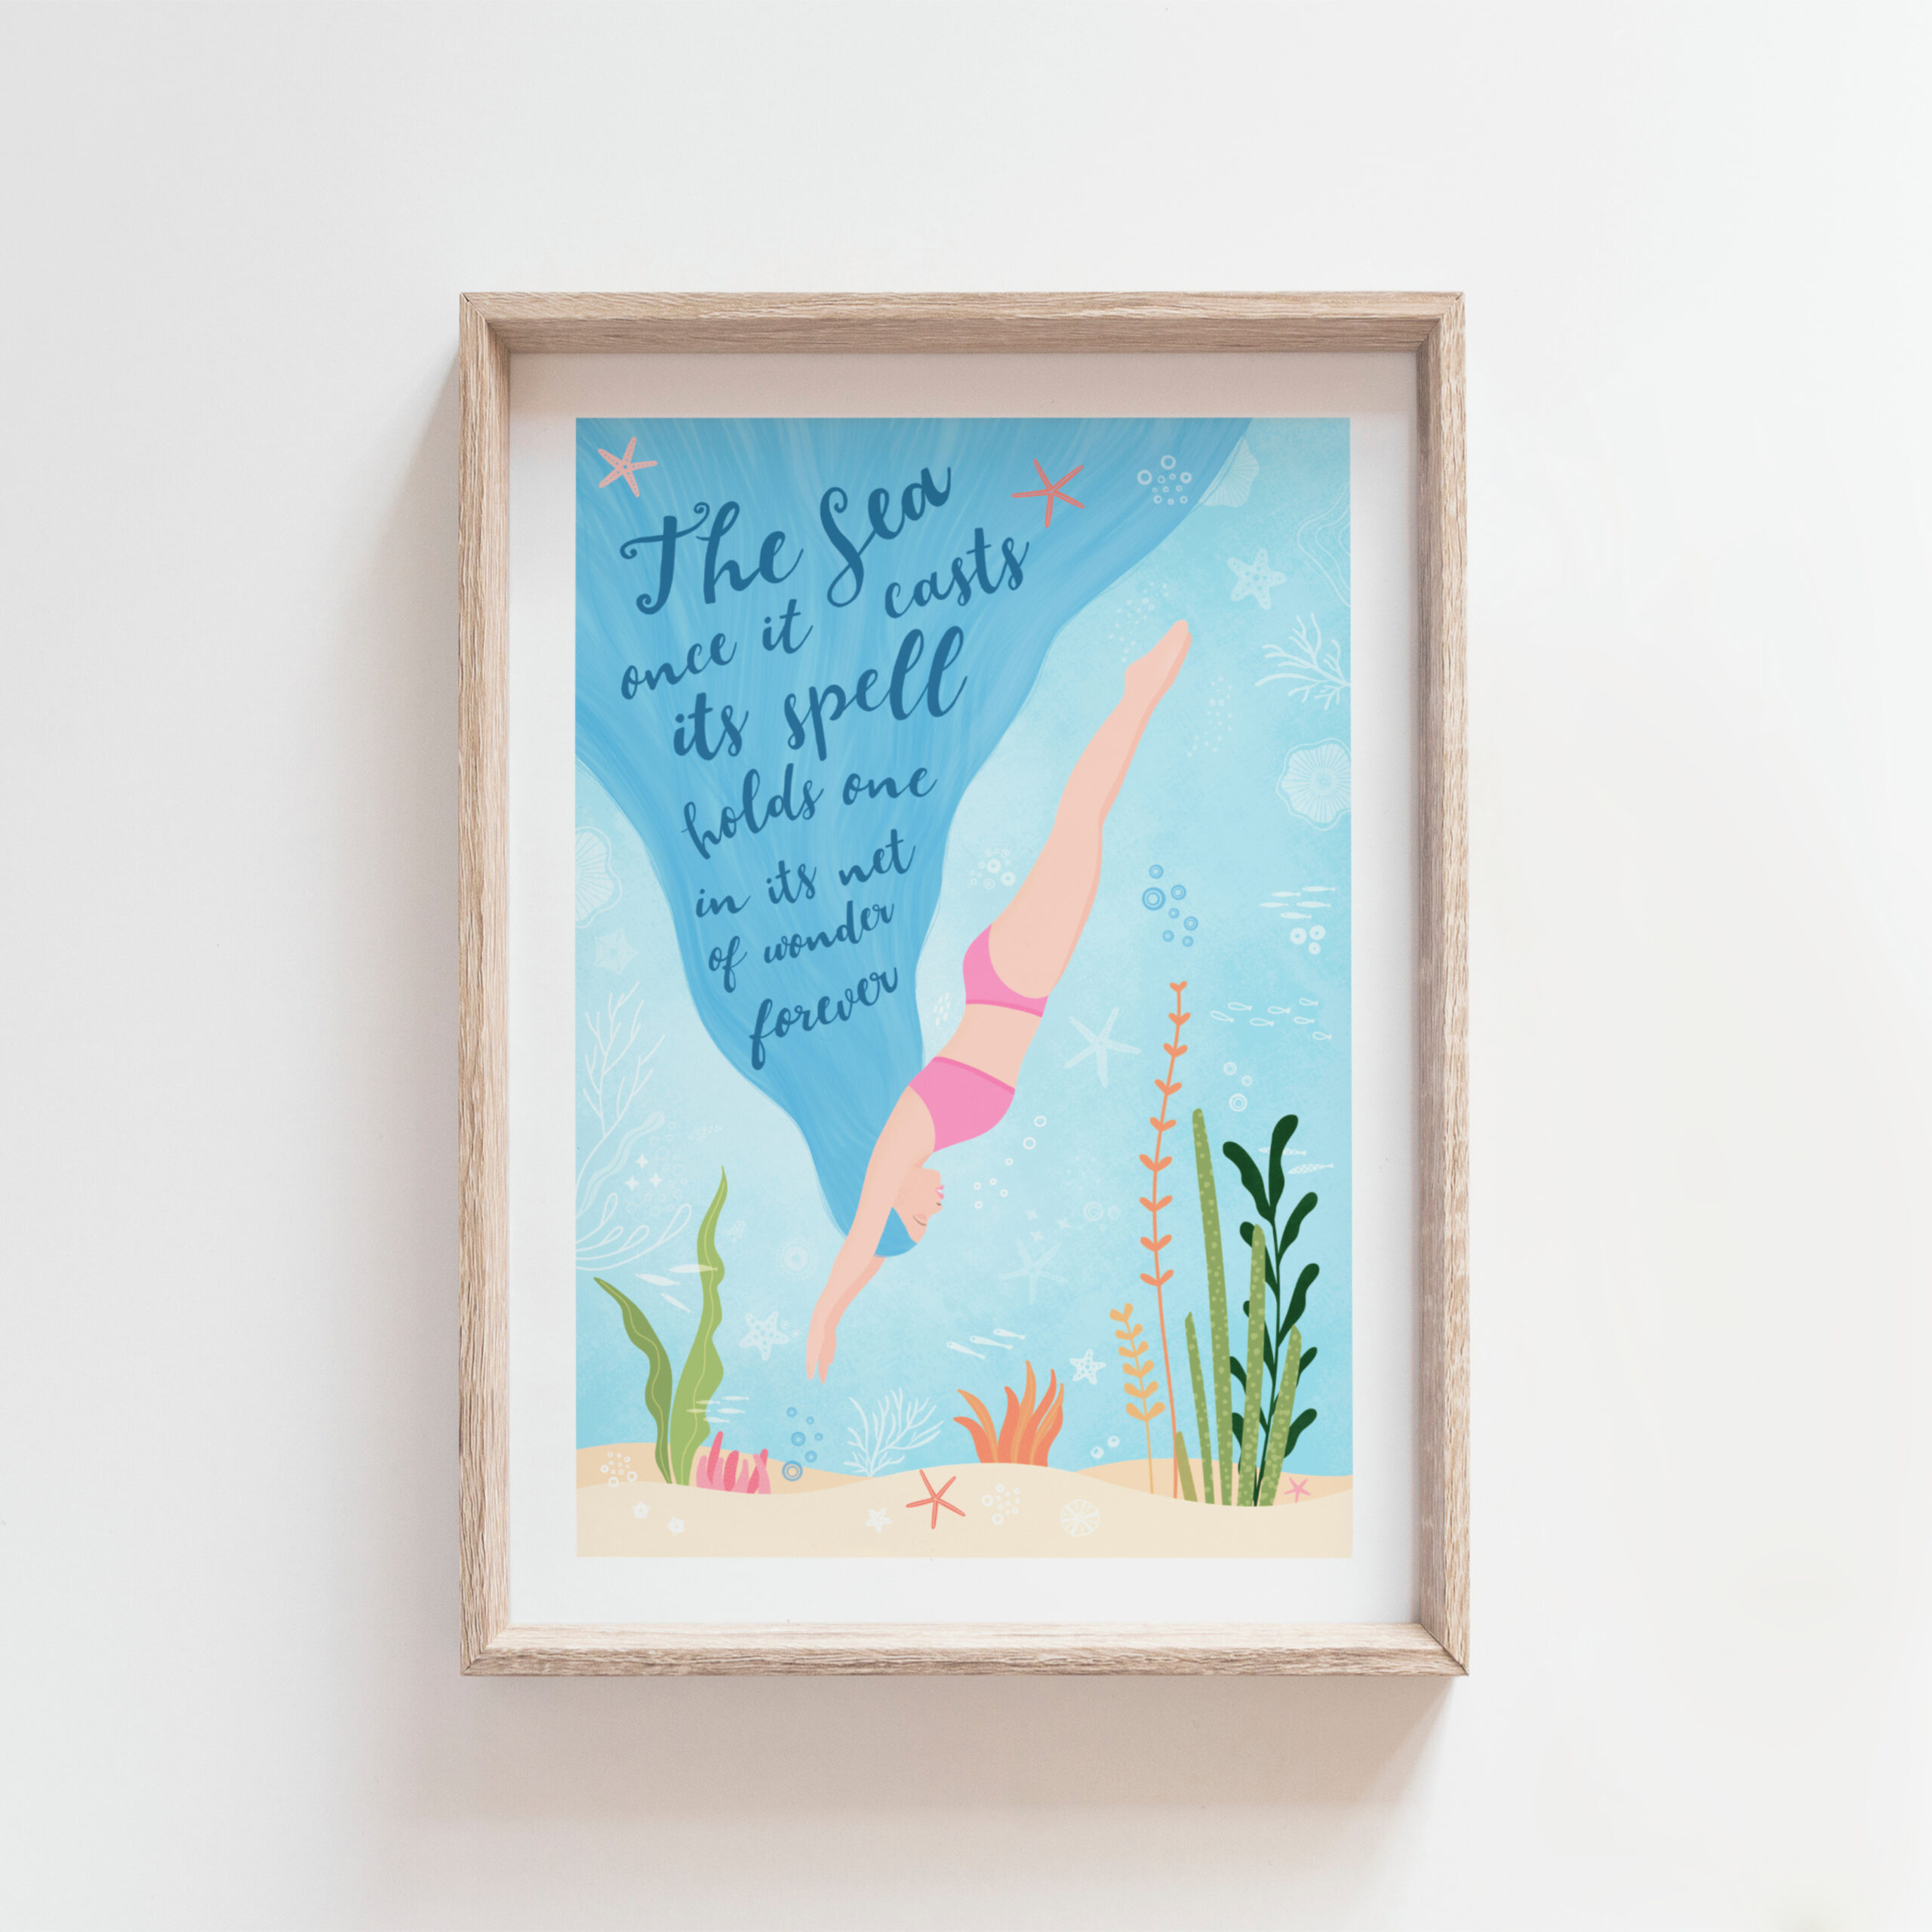 Beneath the Sea - a colourful art print of a woman divinginto the sea with the words of Jacques Cousteau entwined in her hair "The Sea once it casts its spell holds one in its net of wonder forever". Made in Co. Tipperary, Ireland by Fleur & Mimi